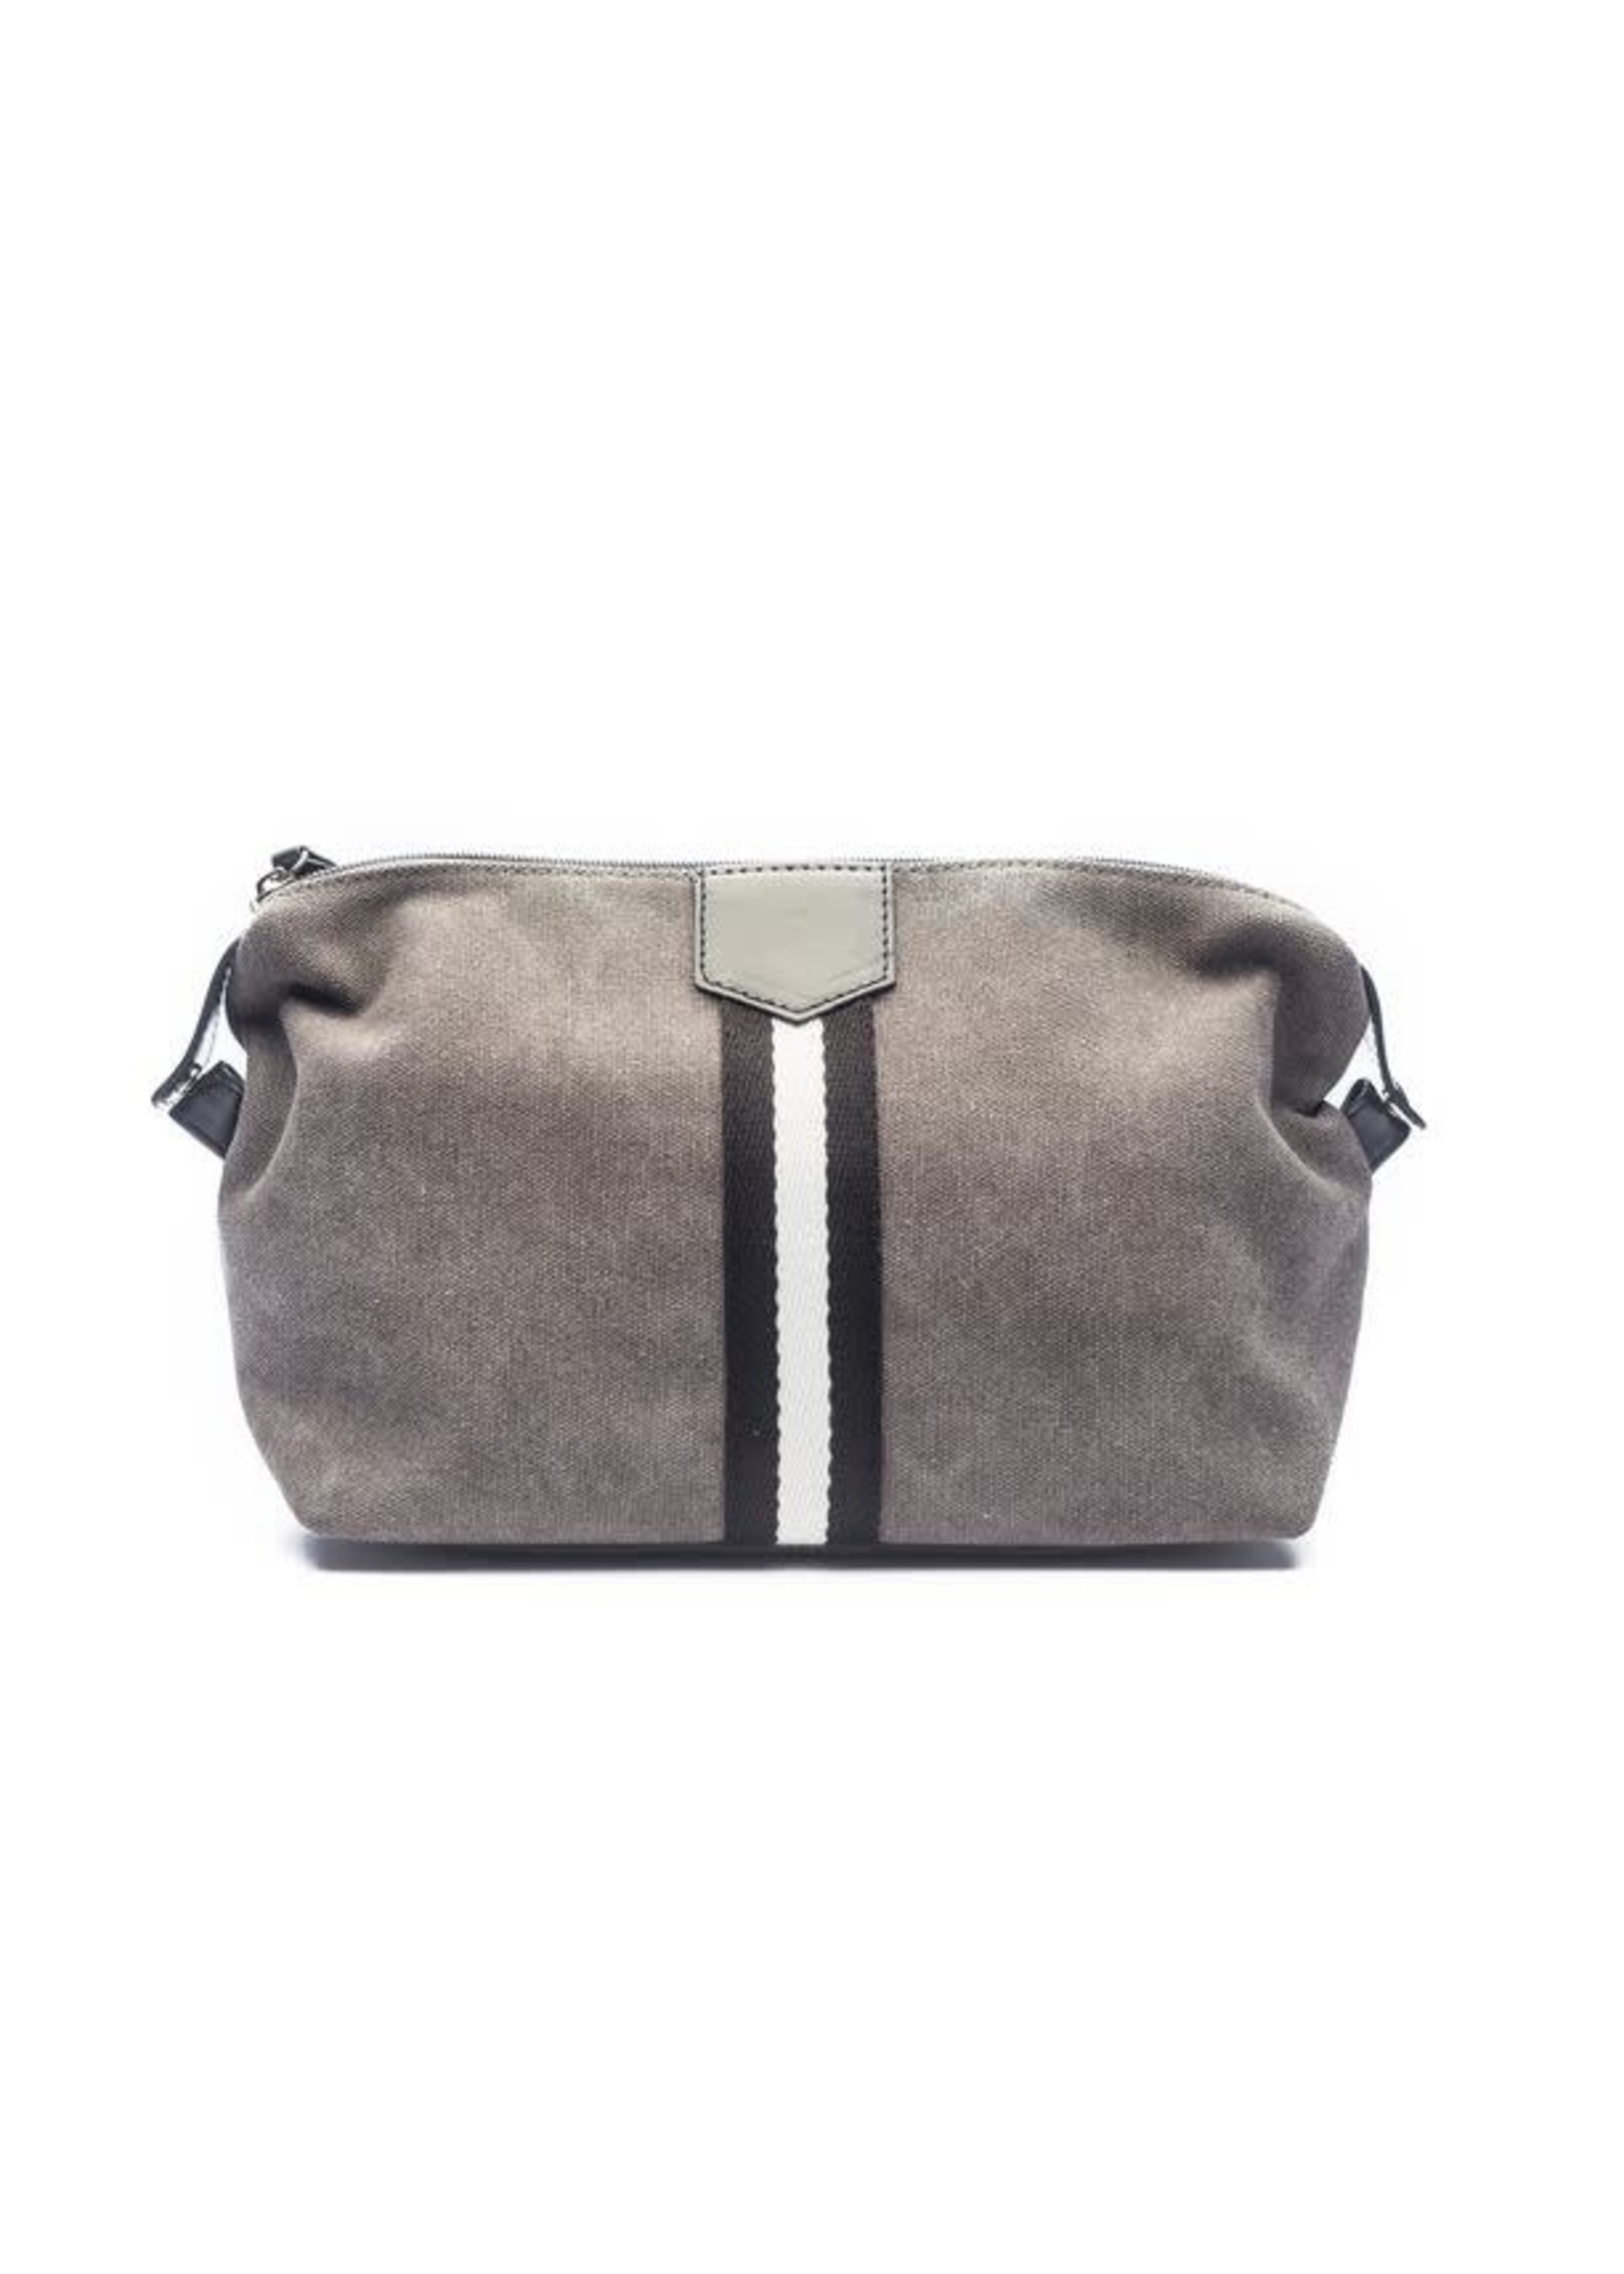 Brouk & Co Brouk Original Toiletry Bag - grey with black and white stripes